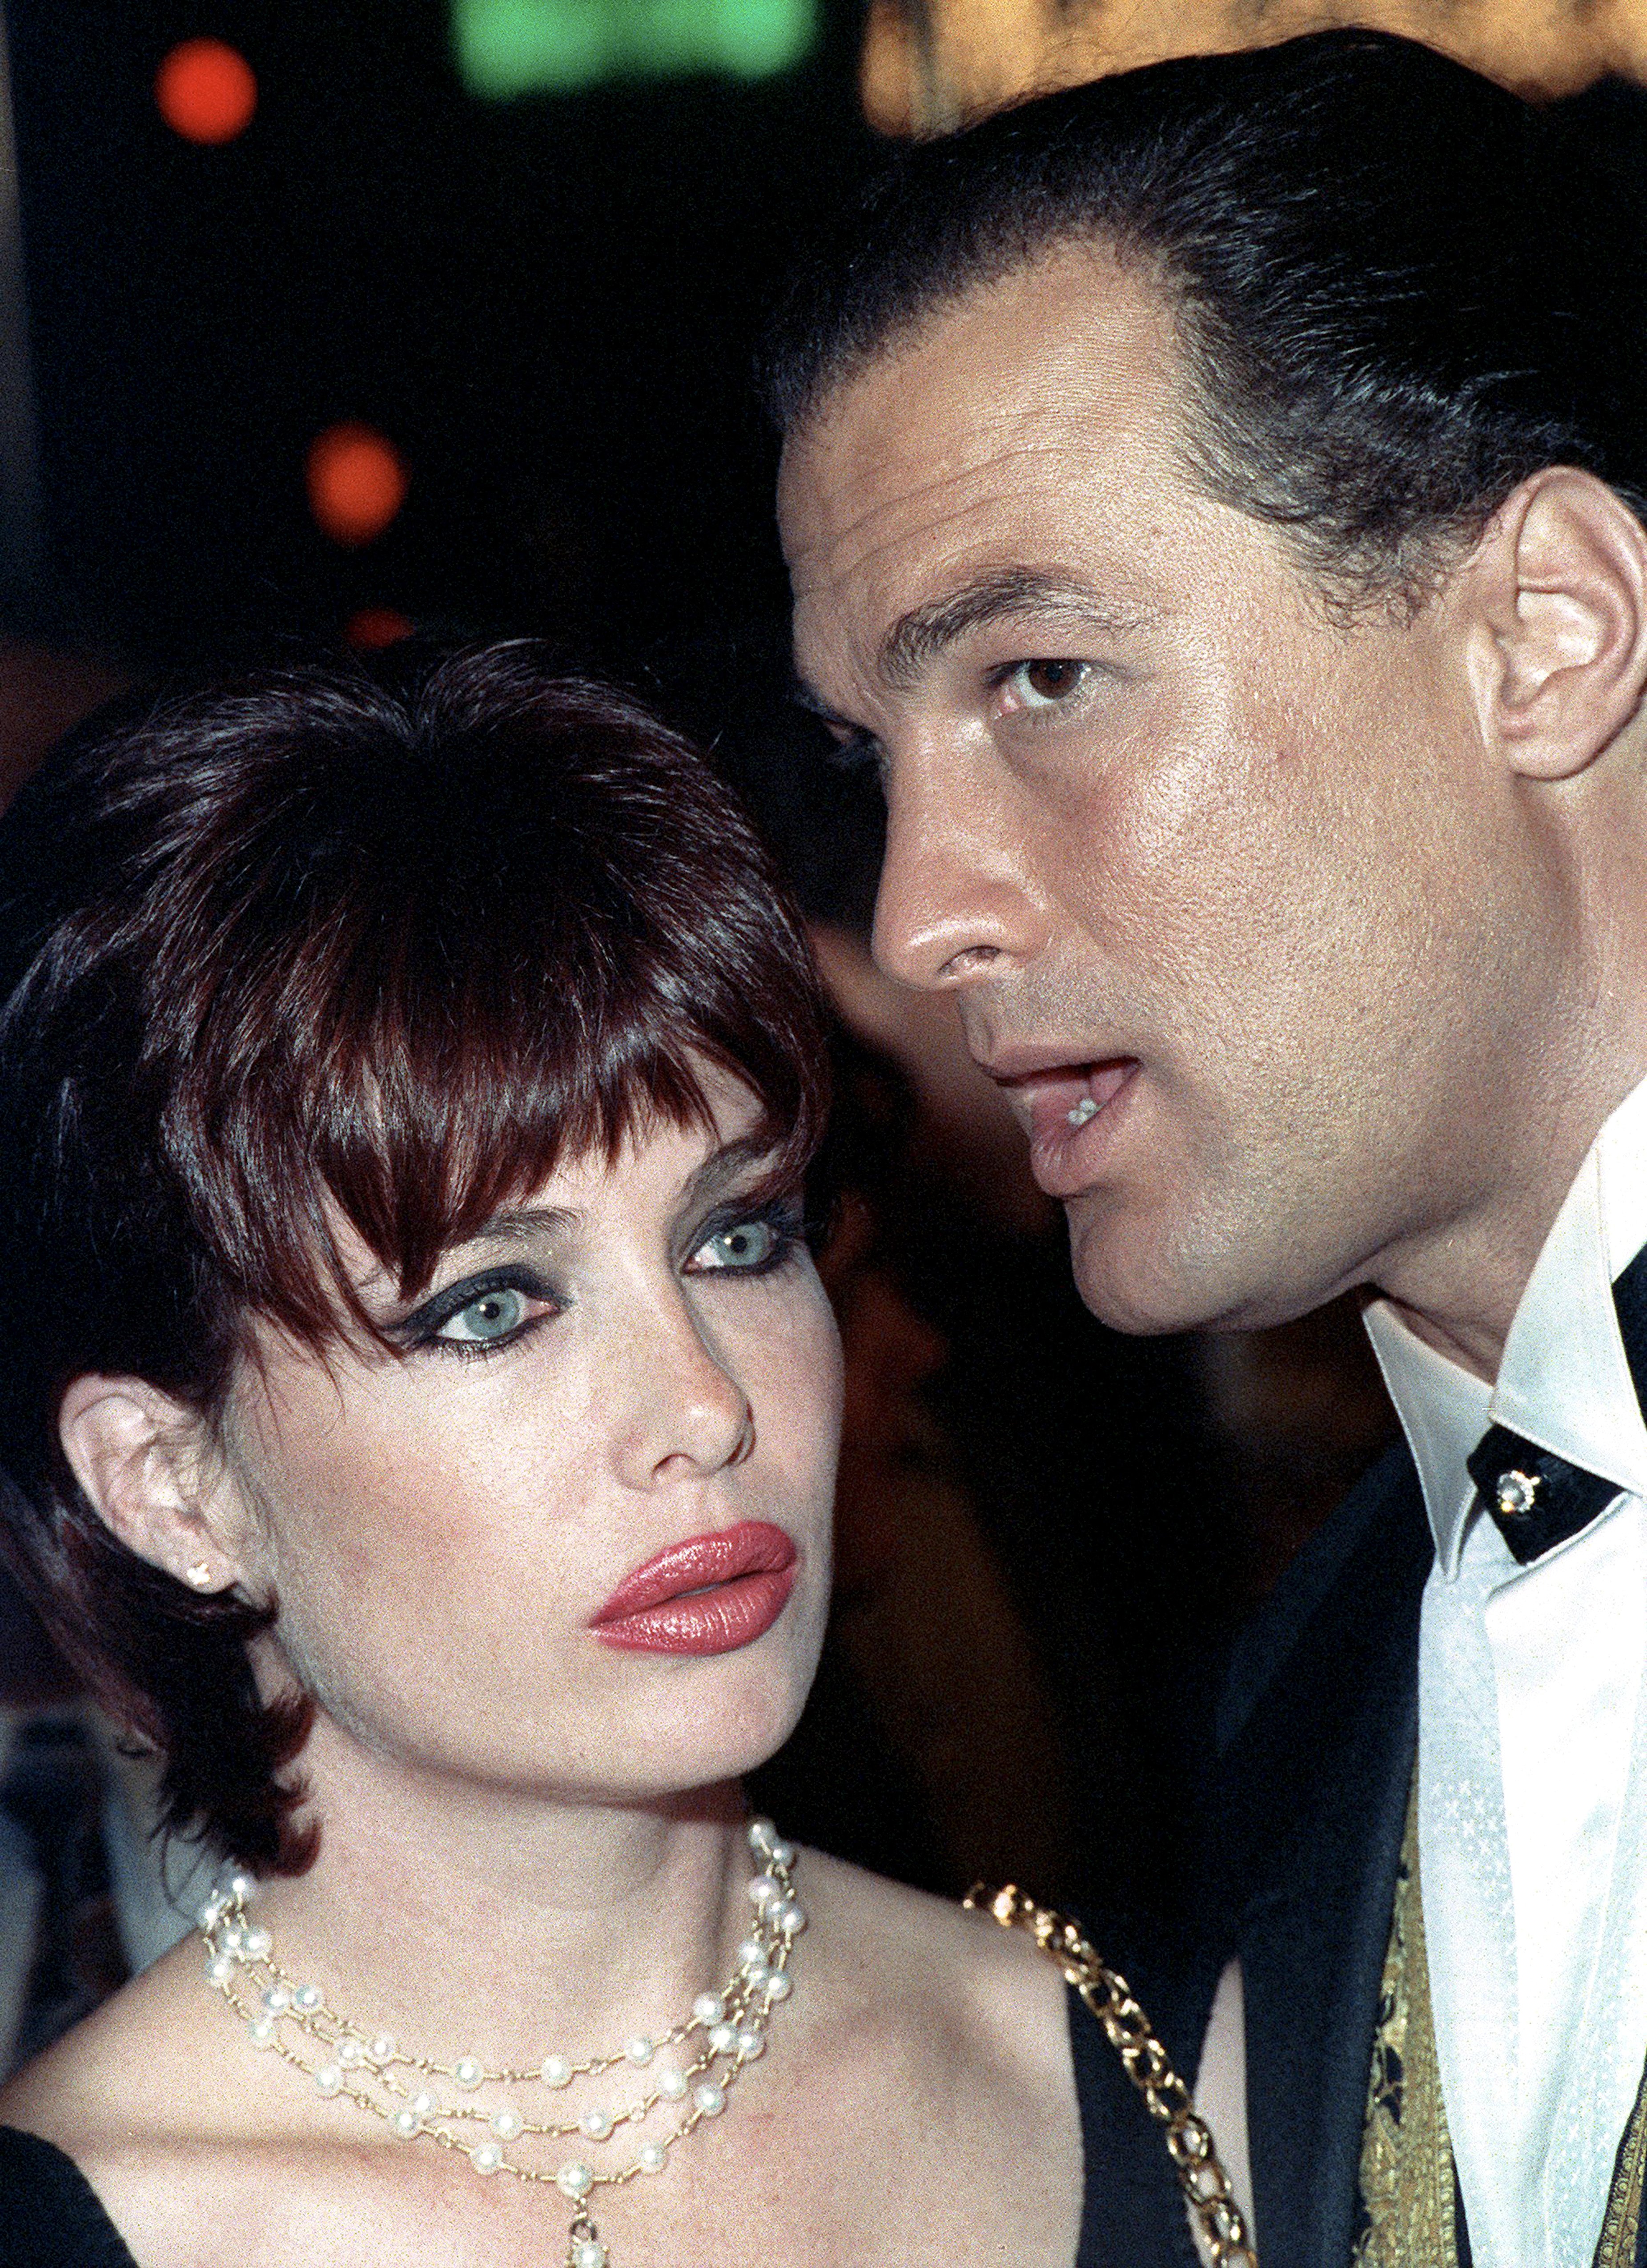 Kelly LeBrock and her husband Steven Seagal during the premiere of "Under Siege" at Mann Village Theater on October 8, 1992 in Westwood, California. / Source: Getty Images